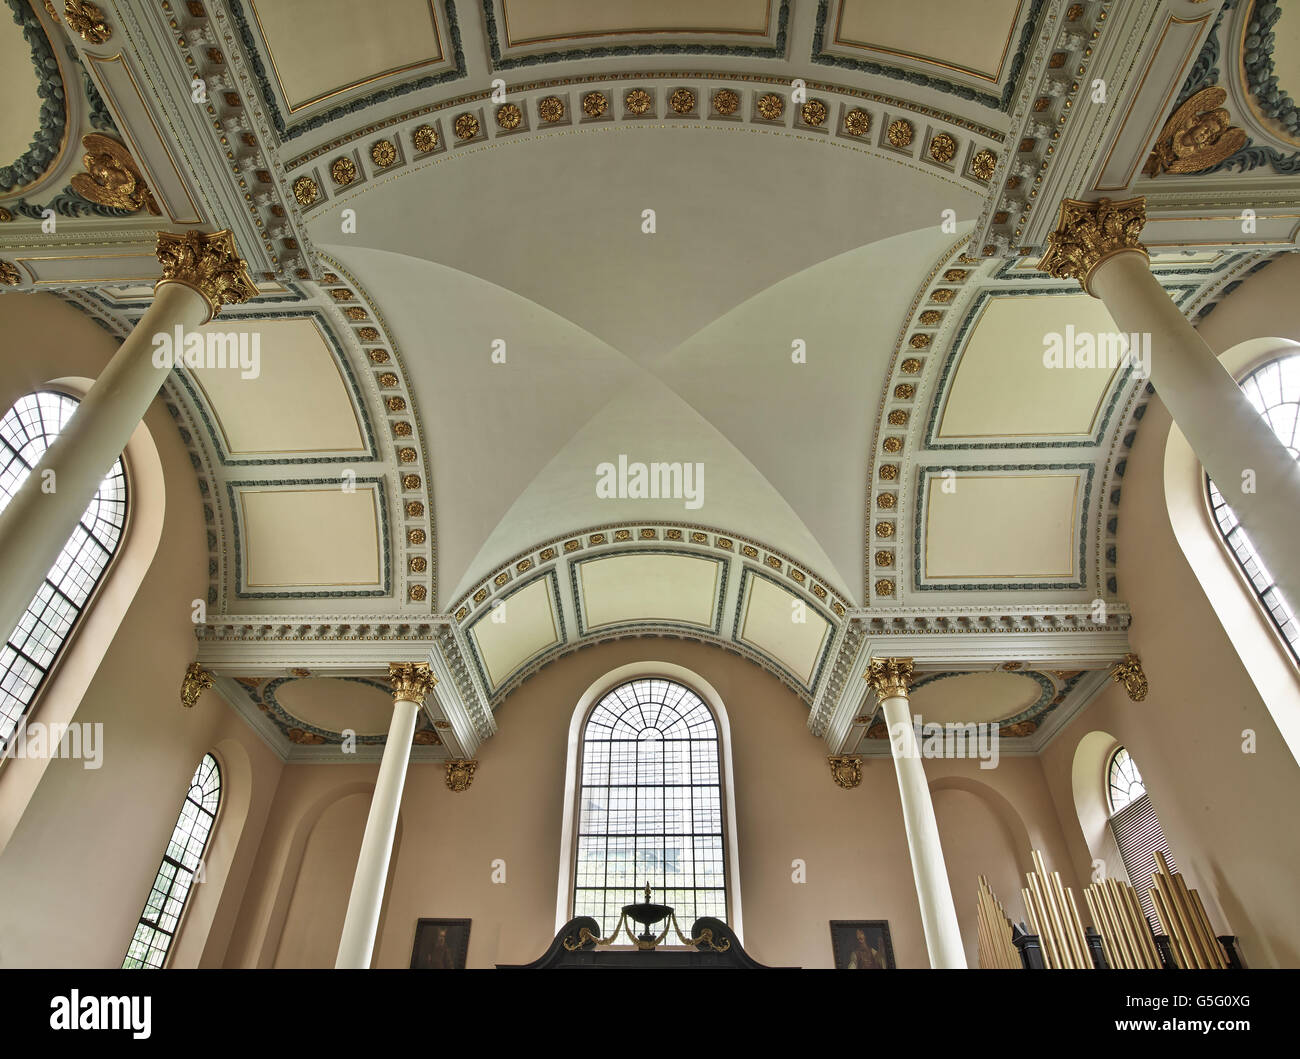 St Anne & St Agnes church London: cross-in-square ceiling Stock Photo